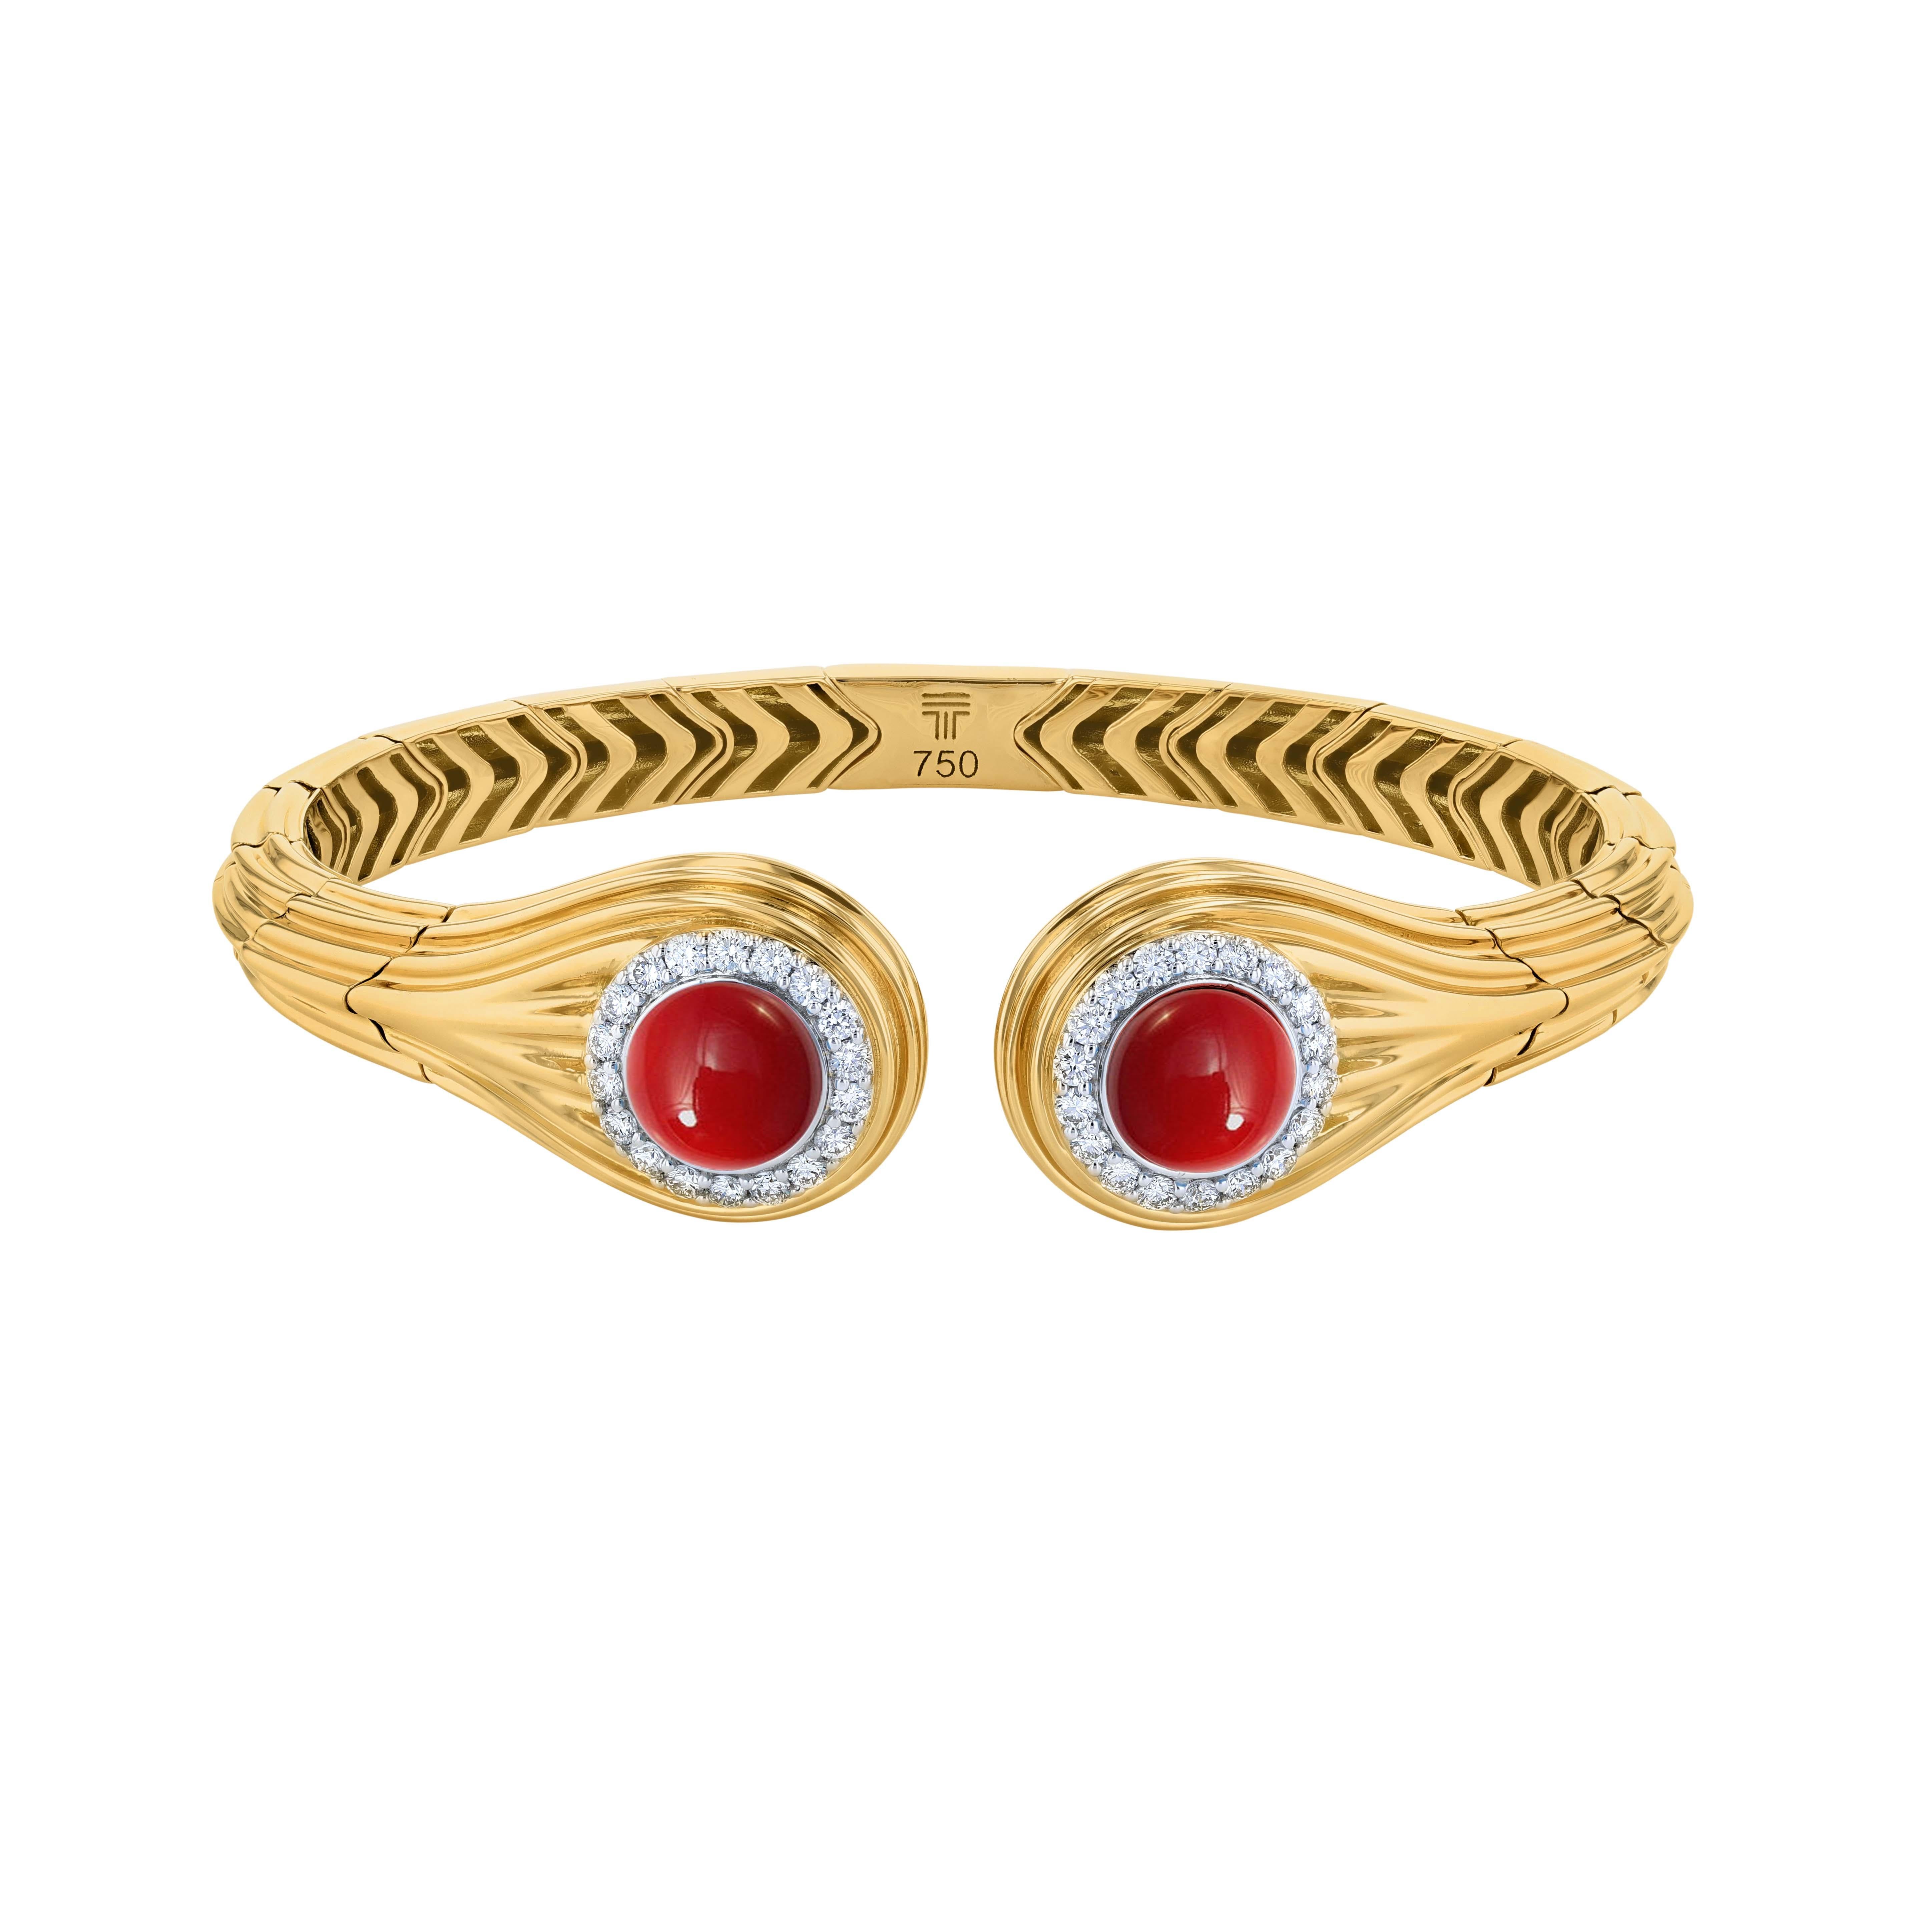 Amwaj, which means “waves” in Arabic, is a collection filled with movement evocative of the undulating waves of the ocean. This collection in 18-Karat gold features turquoise and coral gemstones. On the gold bracelet, shank of the ring and earrings